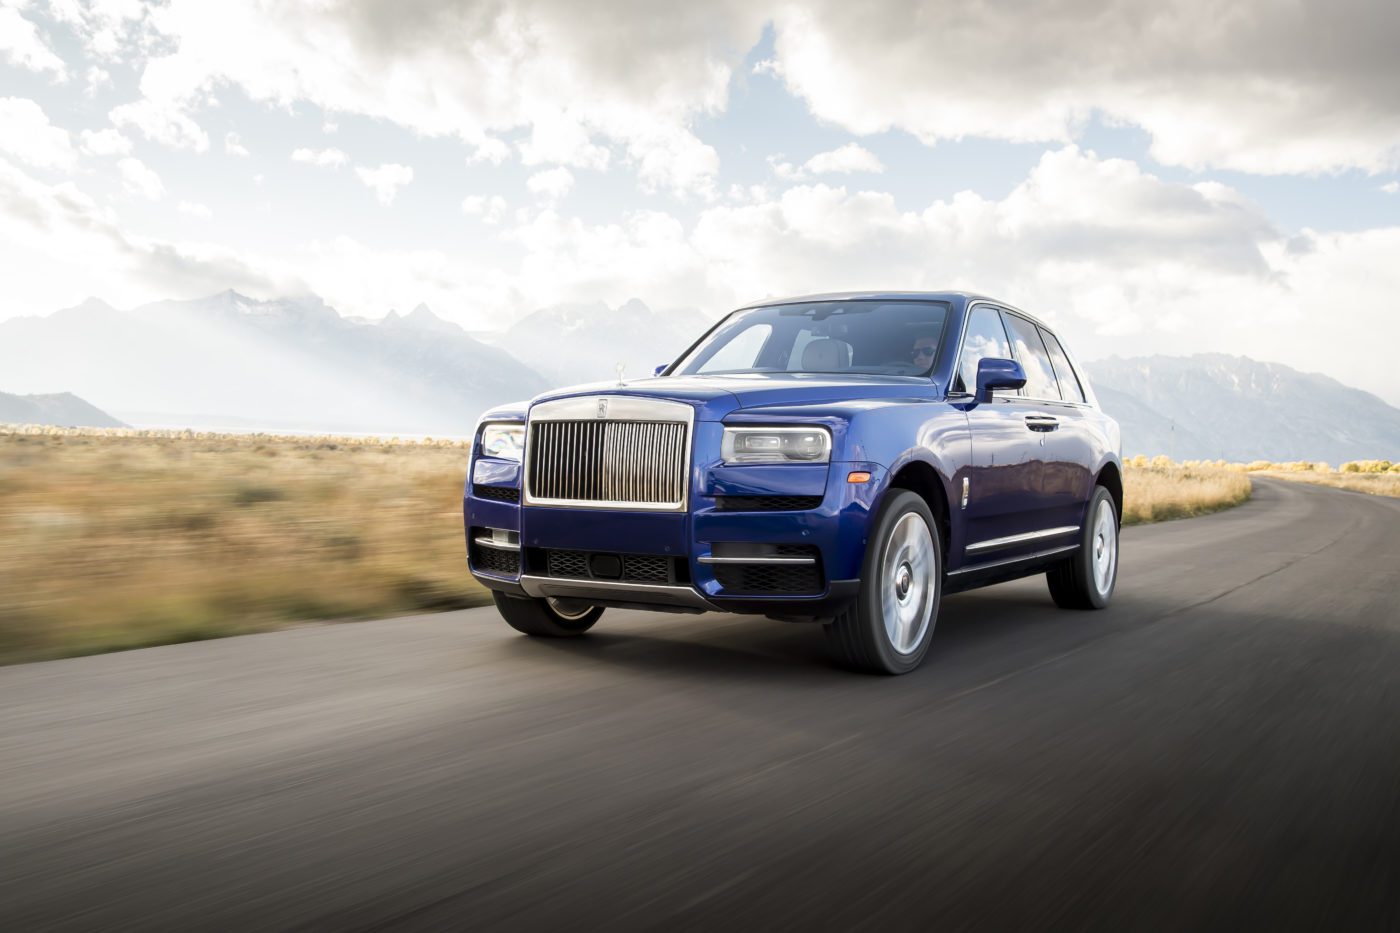 Although it looks amazing on the road, this Rolls-Royce Cullinan longs for going off-road